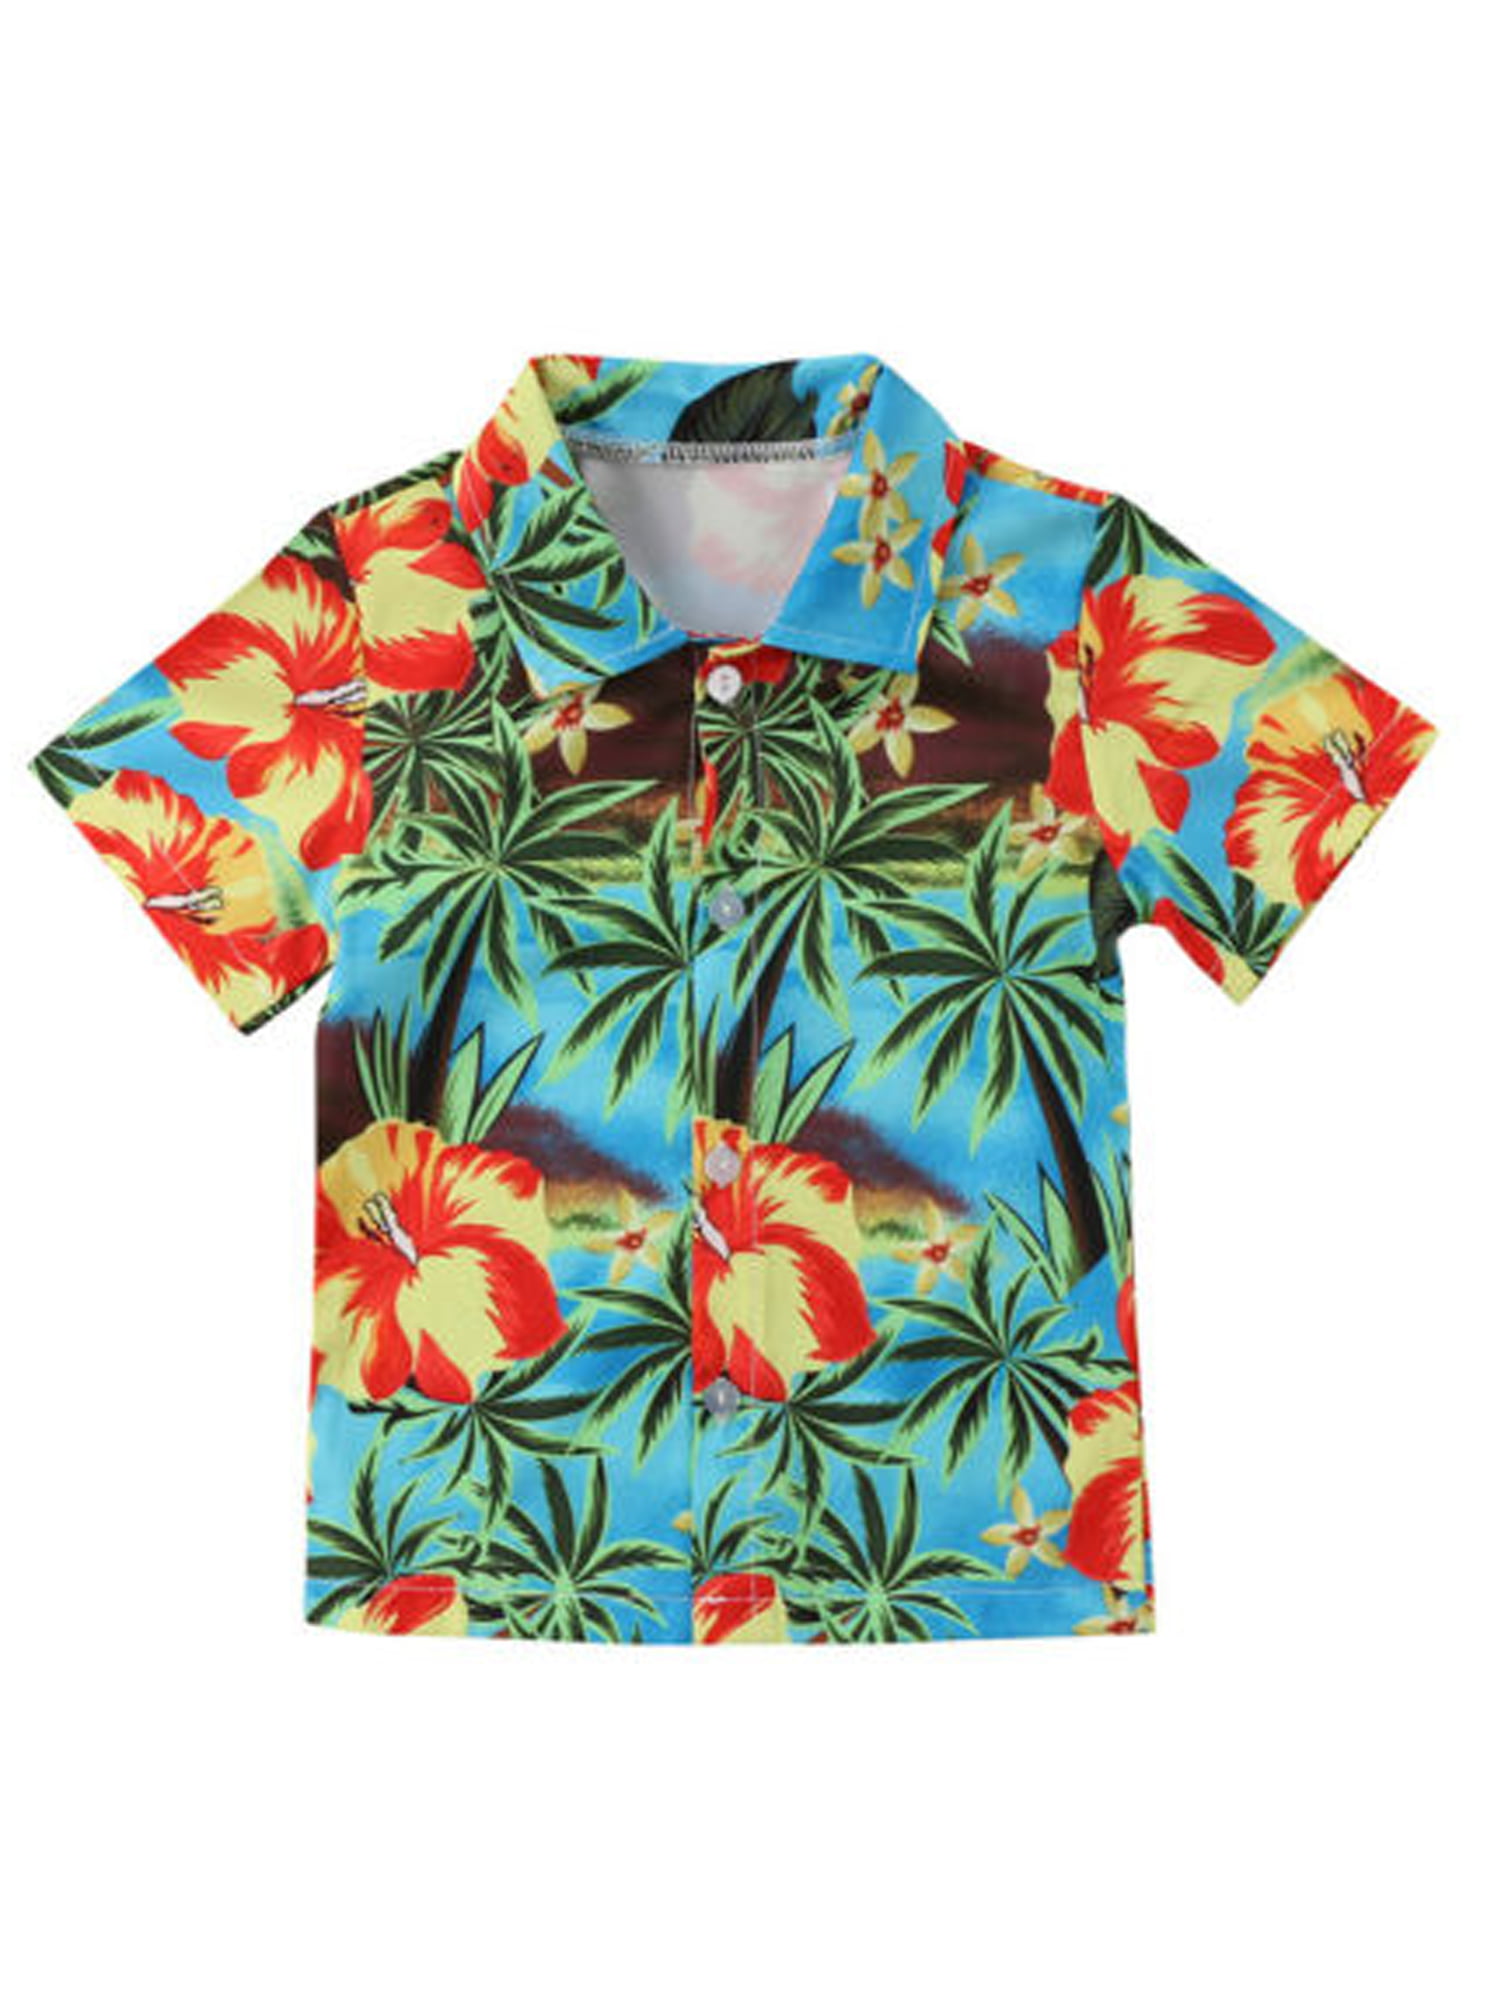 Baby Boys Childrens Retro Vintage Hawaii Printed Long Sleeve 100% Cotton Infants Tops